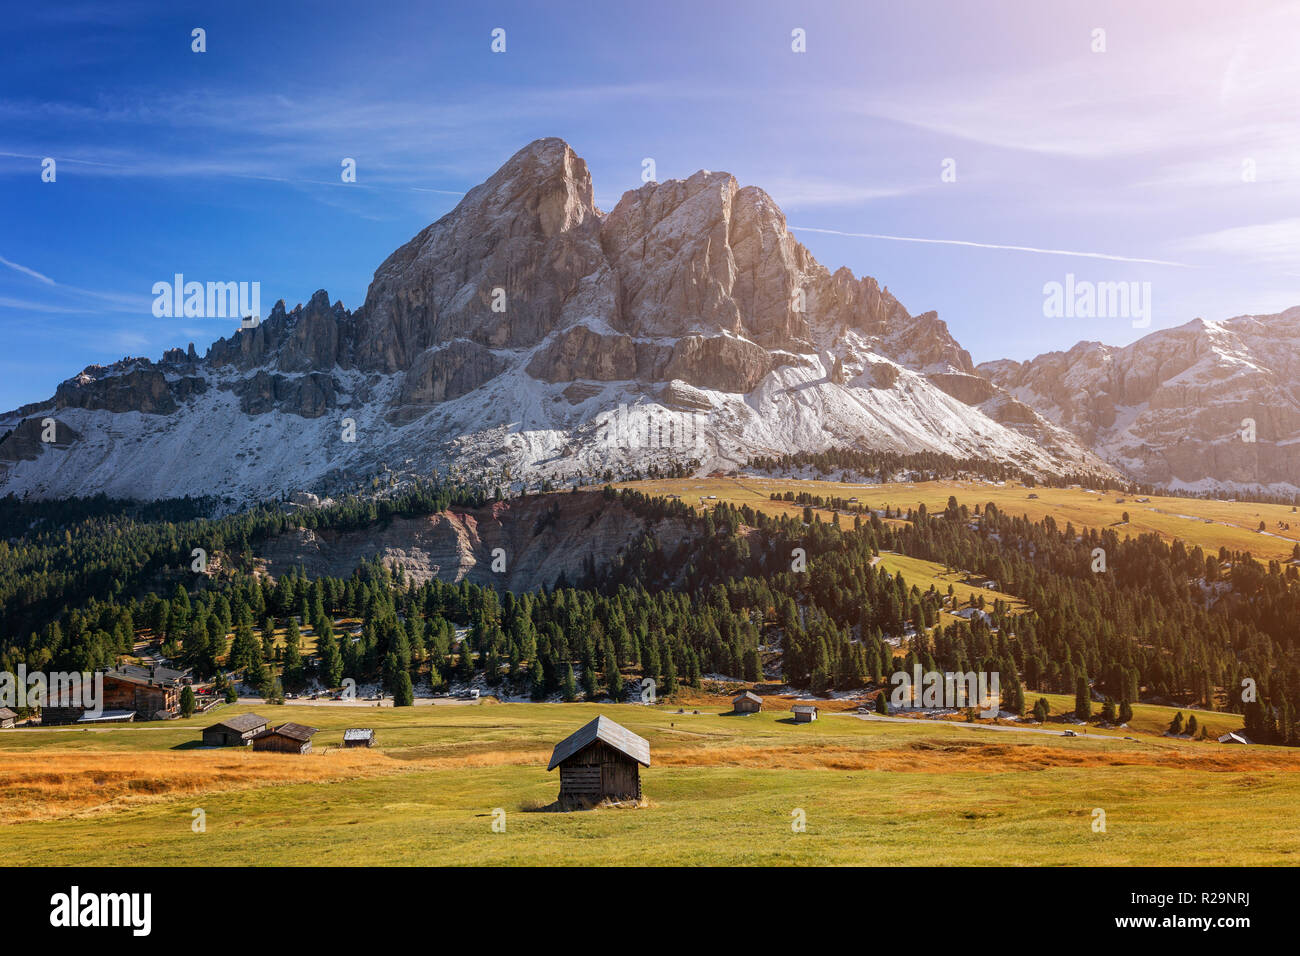 National Park Of The Belluno Dolomites Stock Photos & National Park Of ...